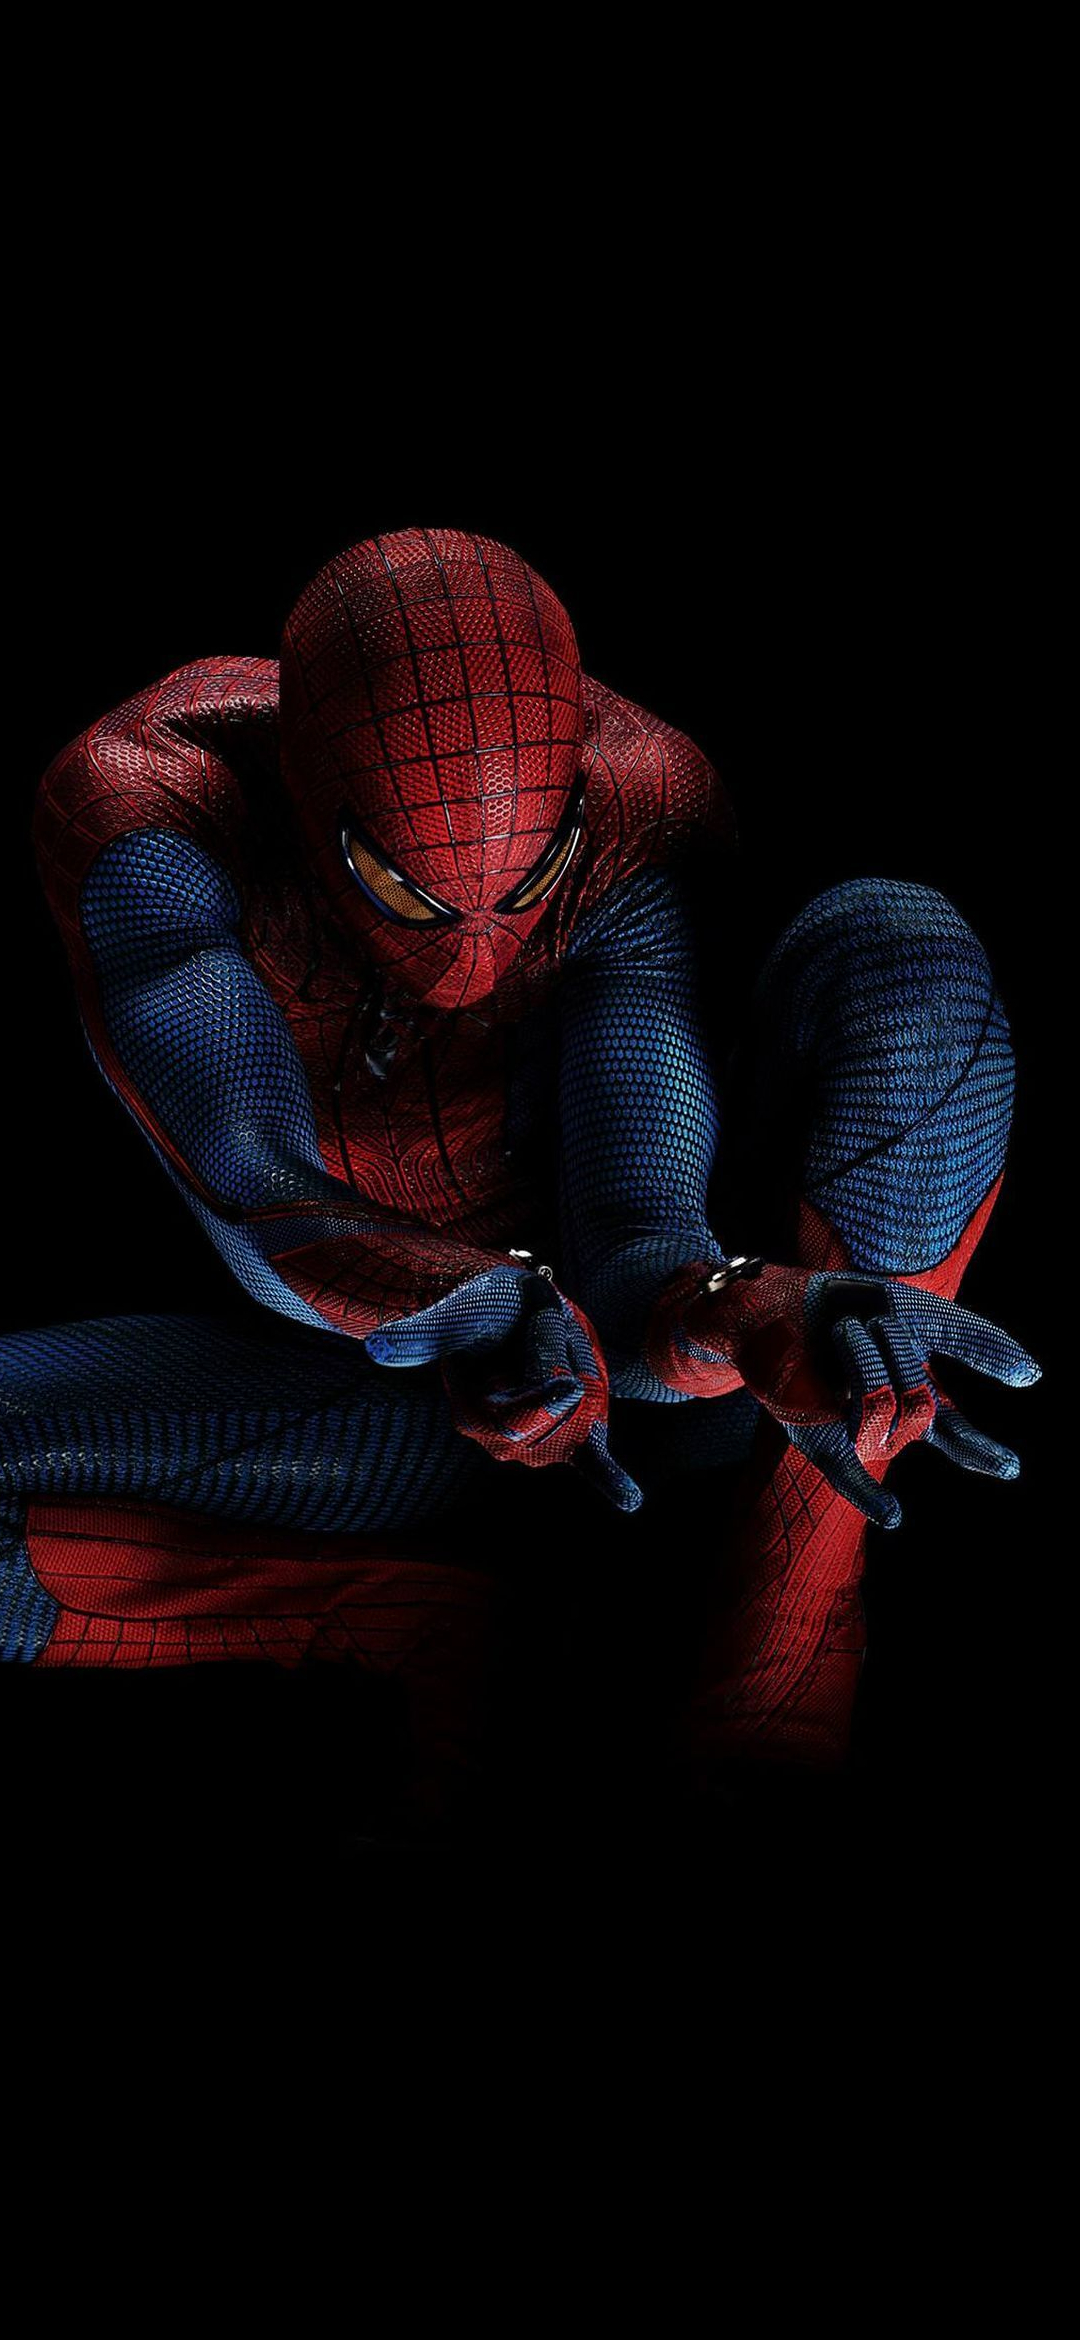 Cool Spiderman Hd Oppo Reno A Android 壁紙 待ち受け スマラン